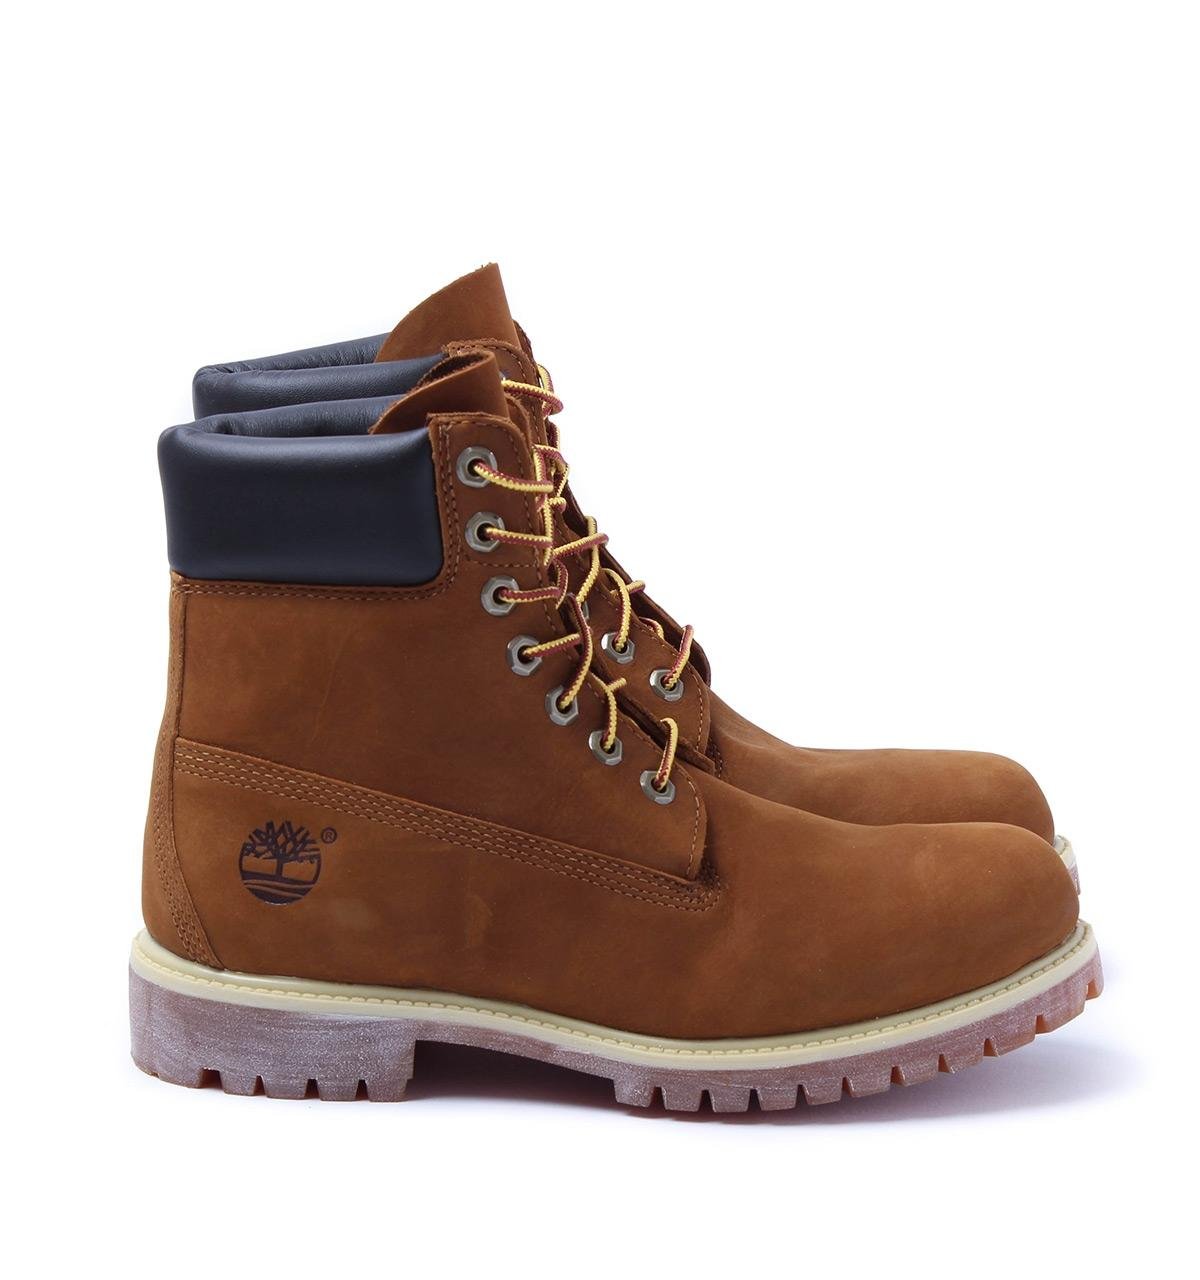 Timberland 6 Inch Boots Rust Top Sellers, SAVE 50% - www.medulla.is